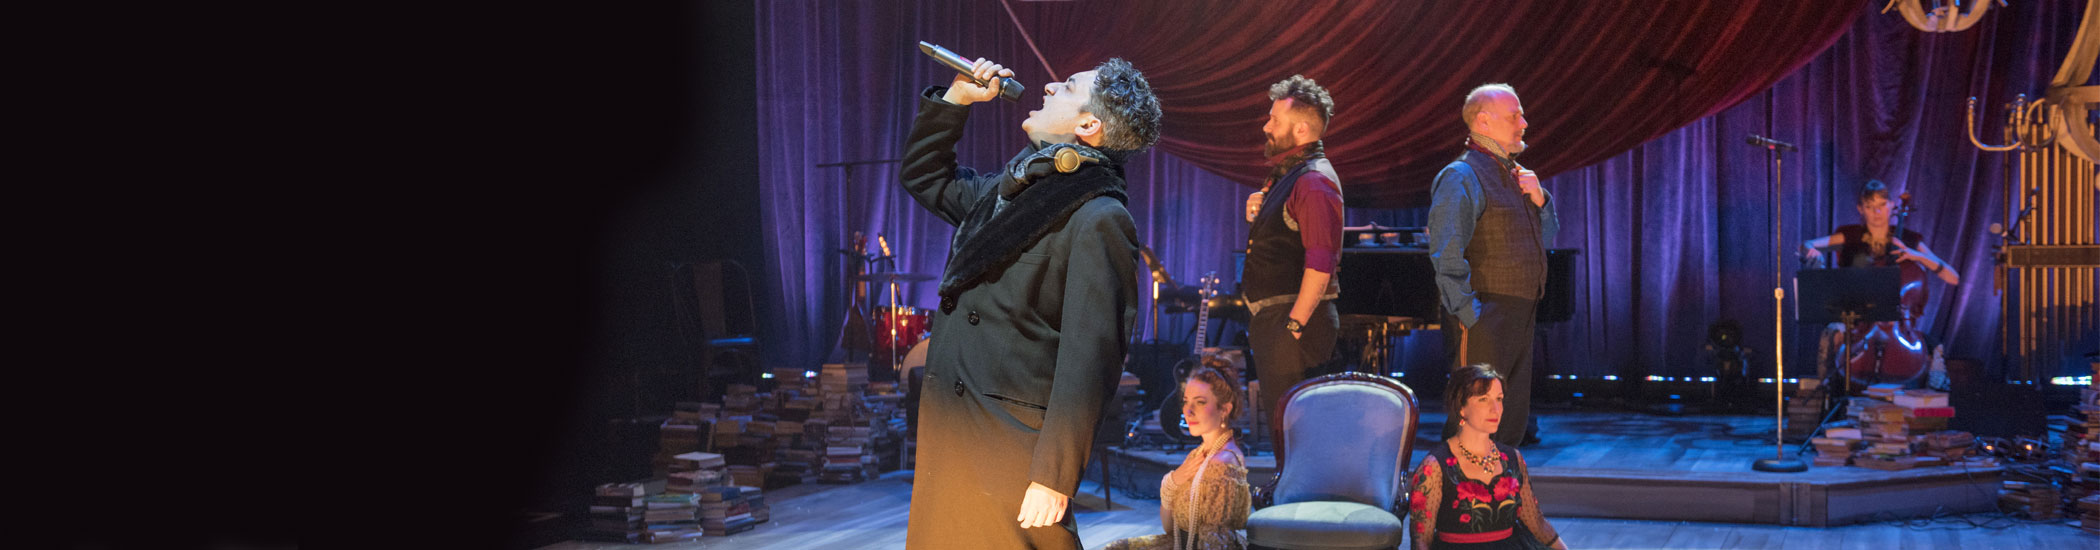 Photo of an actor onstage is singing into a mic with four actors behind him and a cellist in the background.